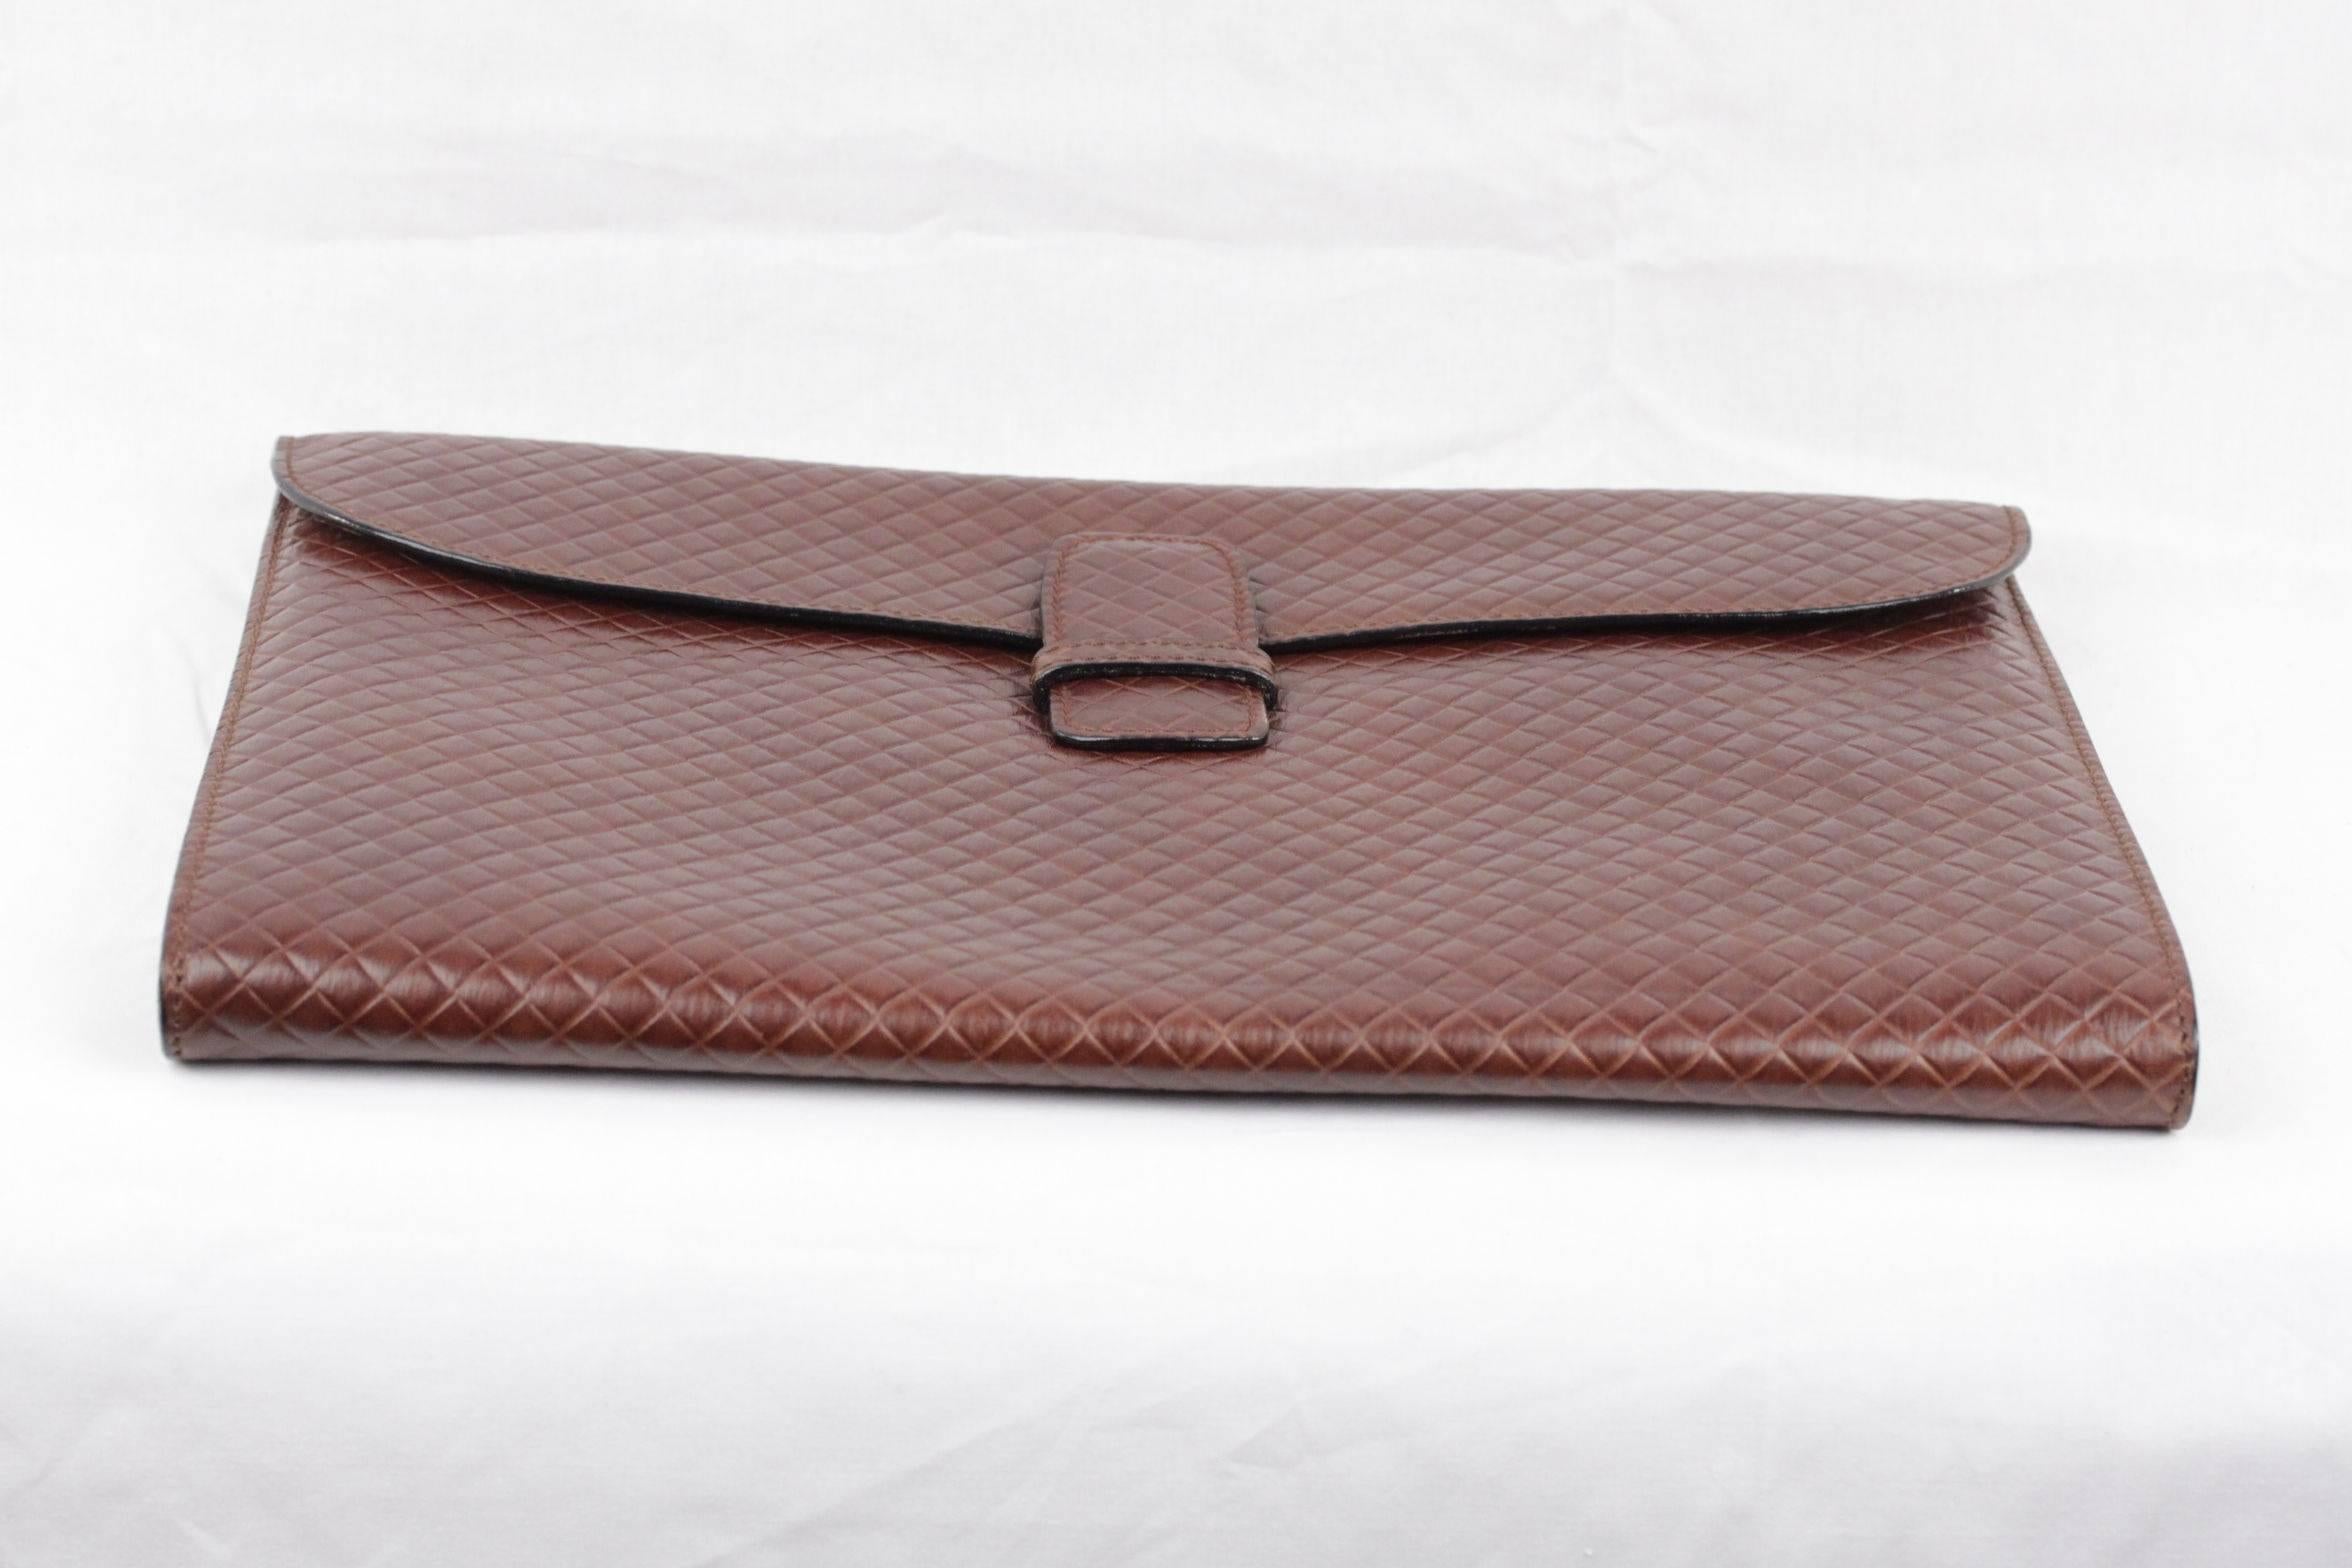 Brand: BOTTEGA VENETA - made in Italy

Logos / Tags: 'BOTTEGA VENETA - Made in Italy' tag inside, BOTTEGA VENETA authenticity label

Condition rate & details (please read our condition chart below): EXCELLENT CONDITION: Very little wear, no